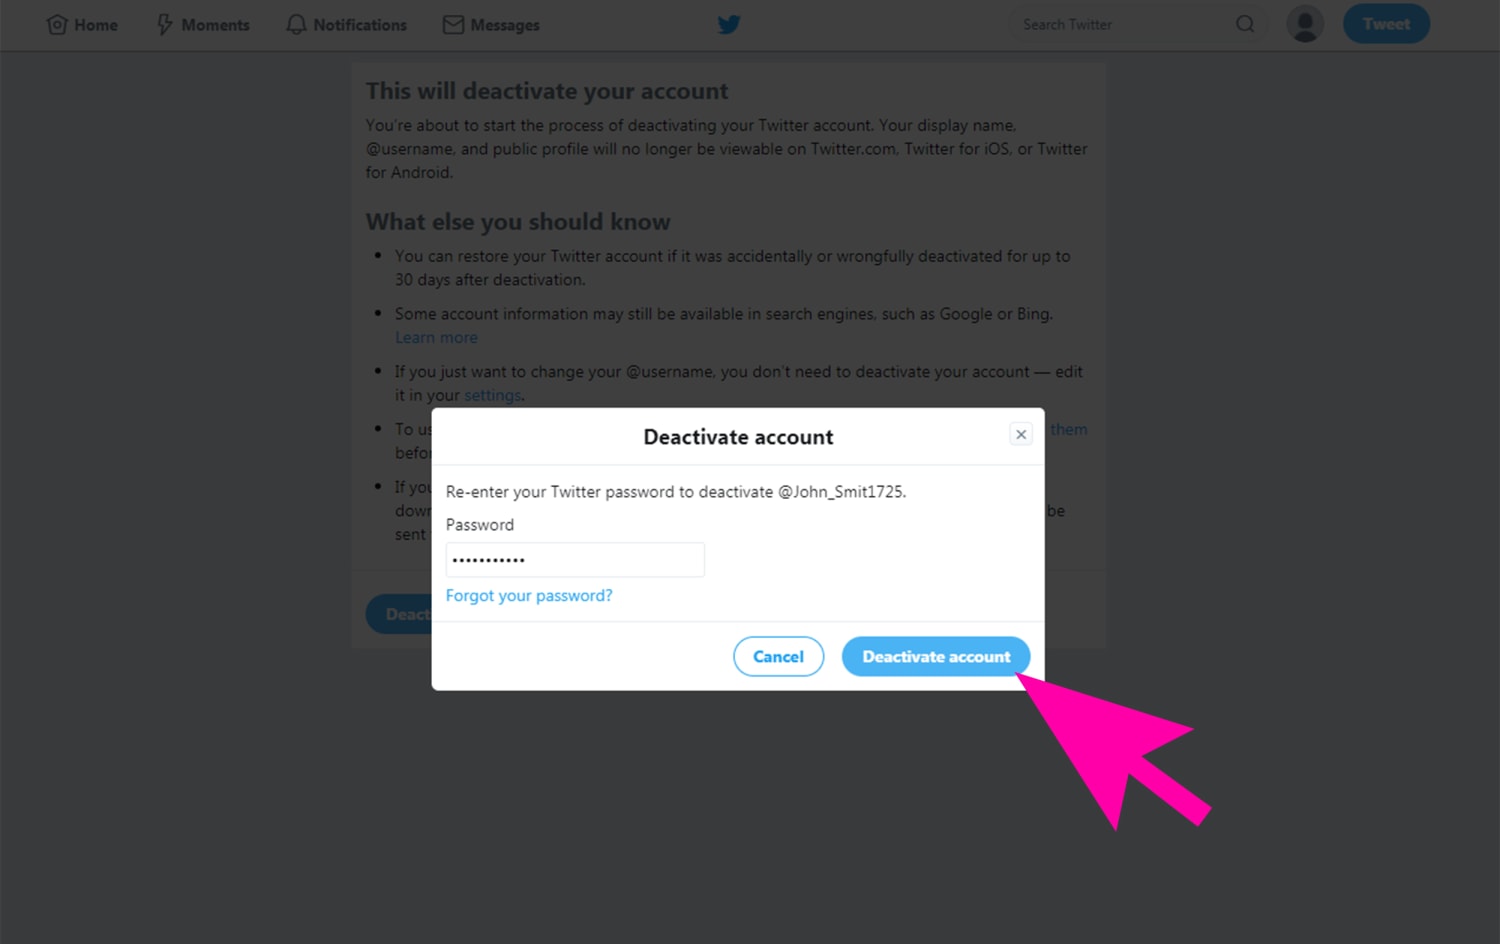 How to delete a Twitter account or deactivate it in 21